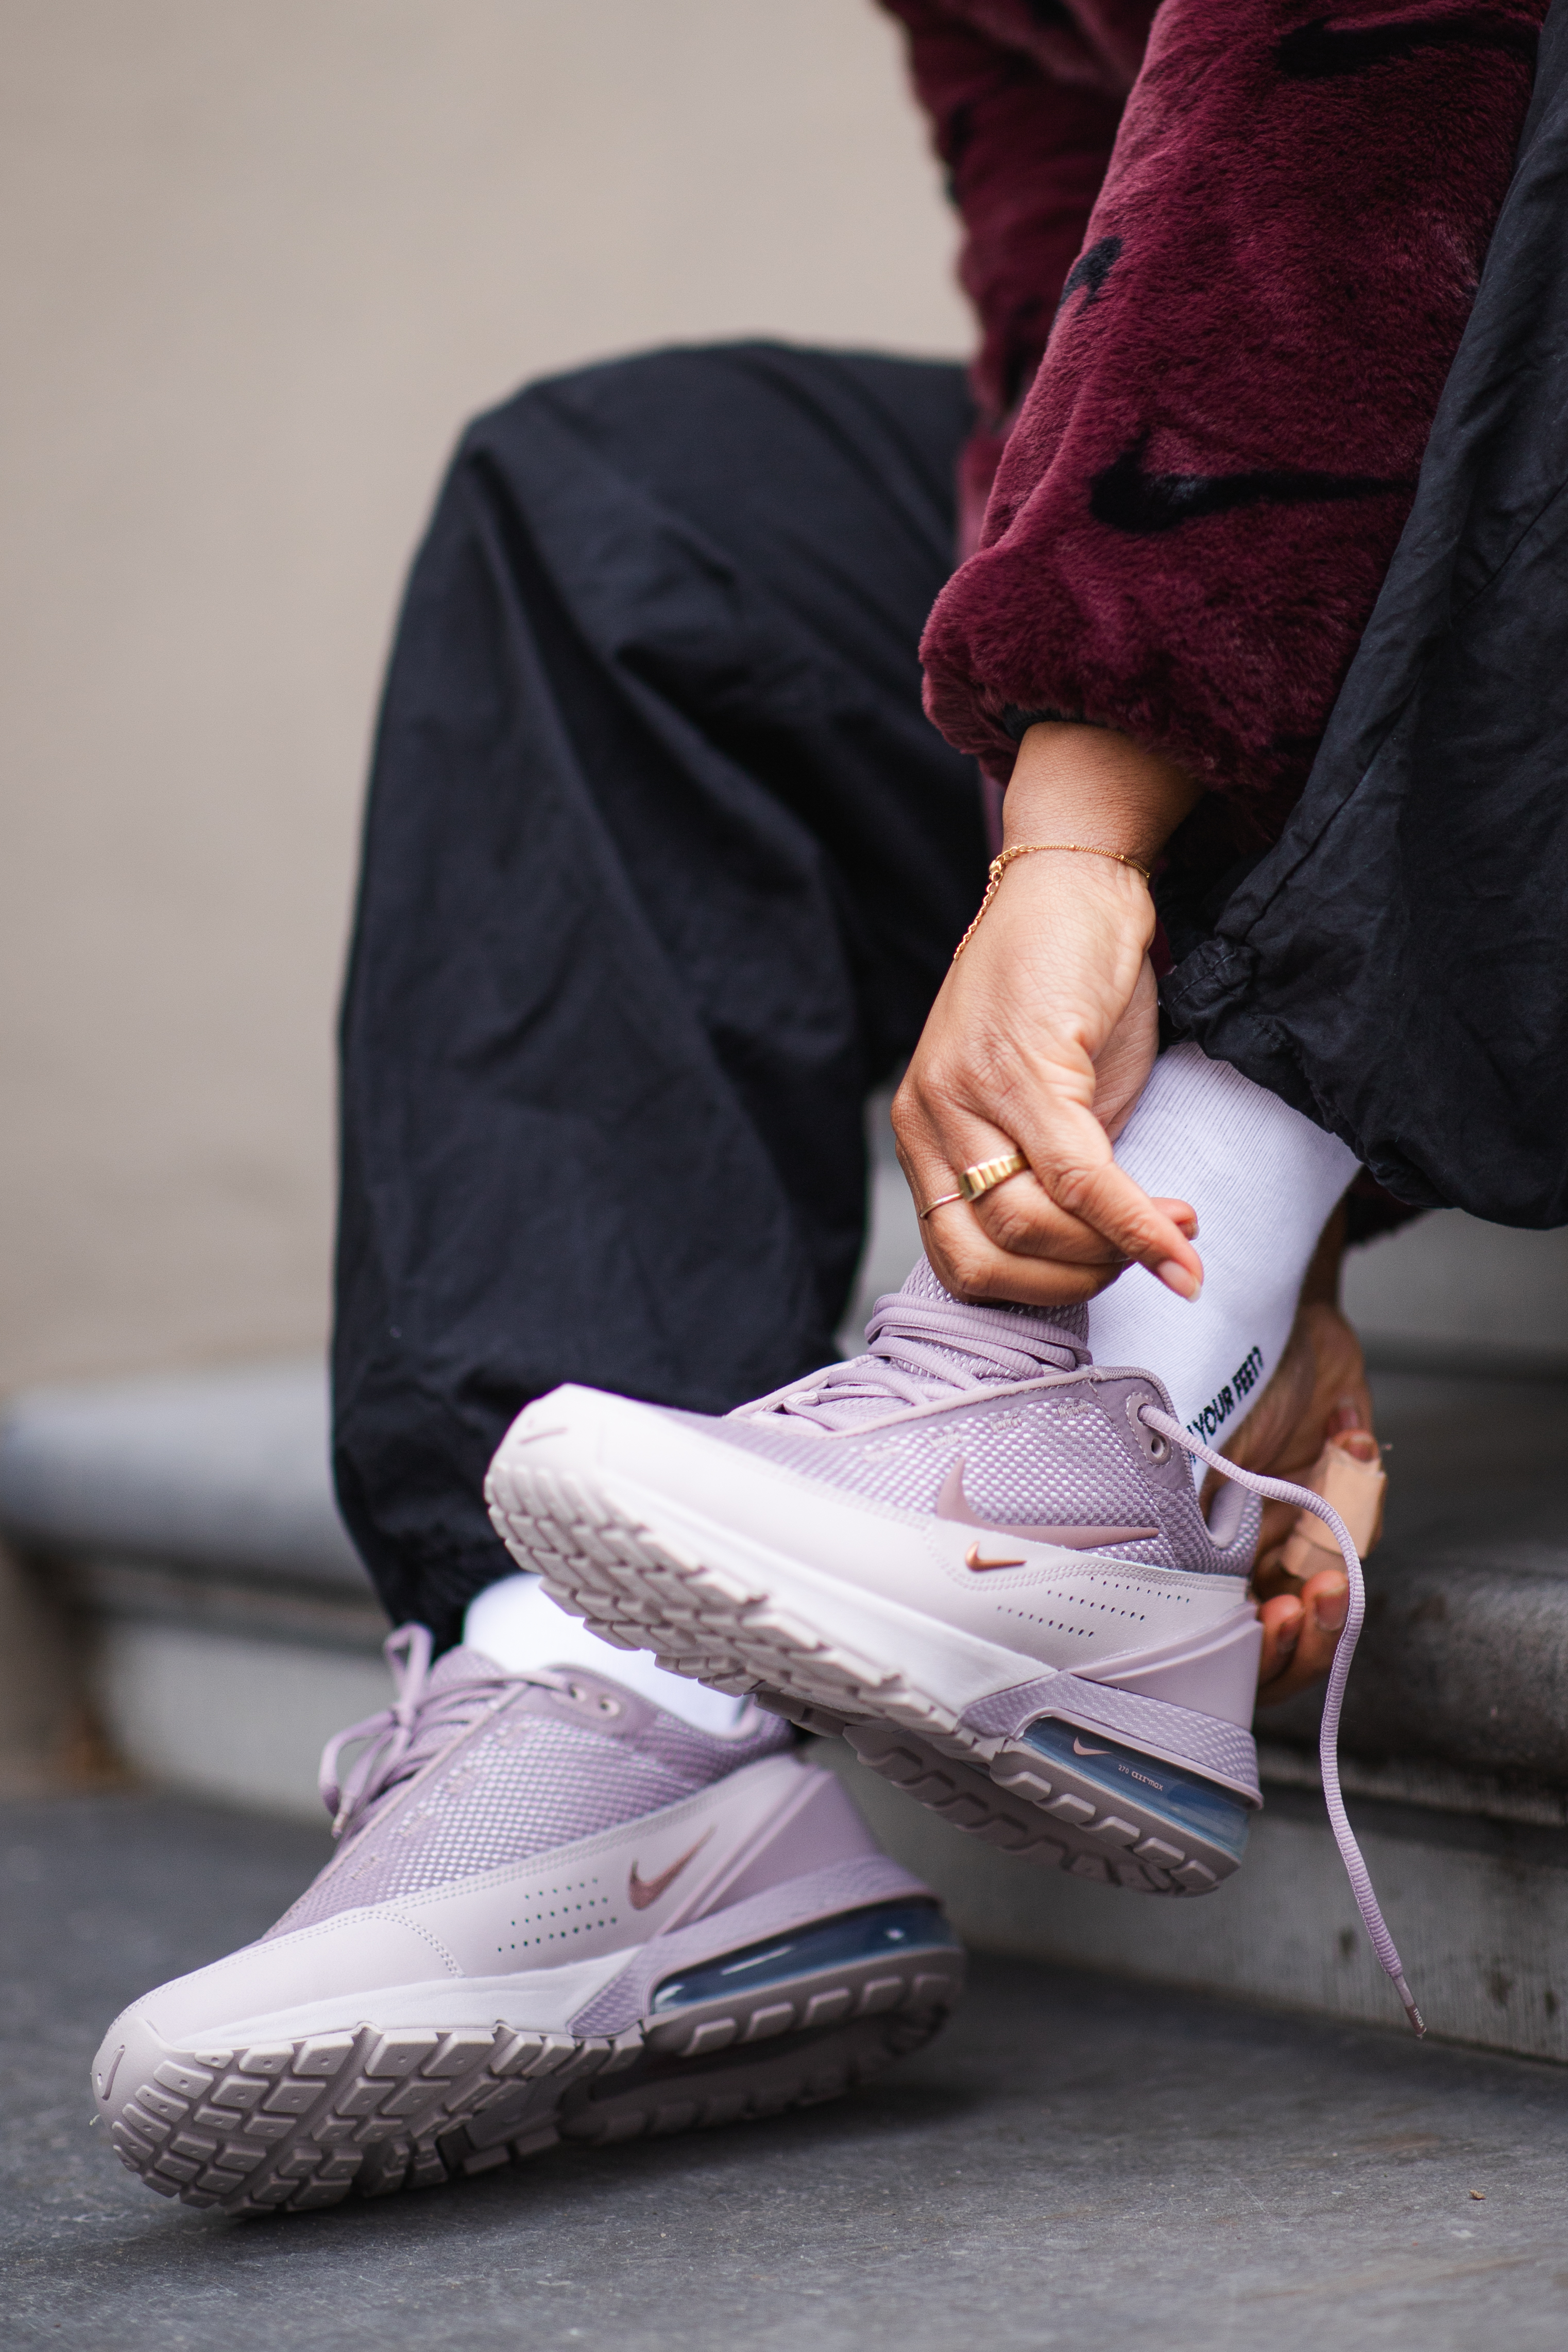 Nike Air Max Pulse WMNS 'Light Violet Ore' on feet